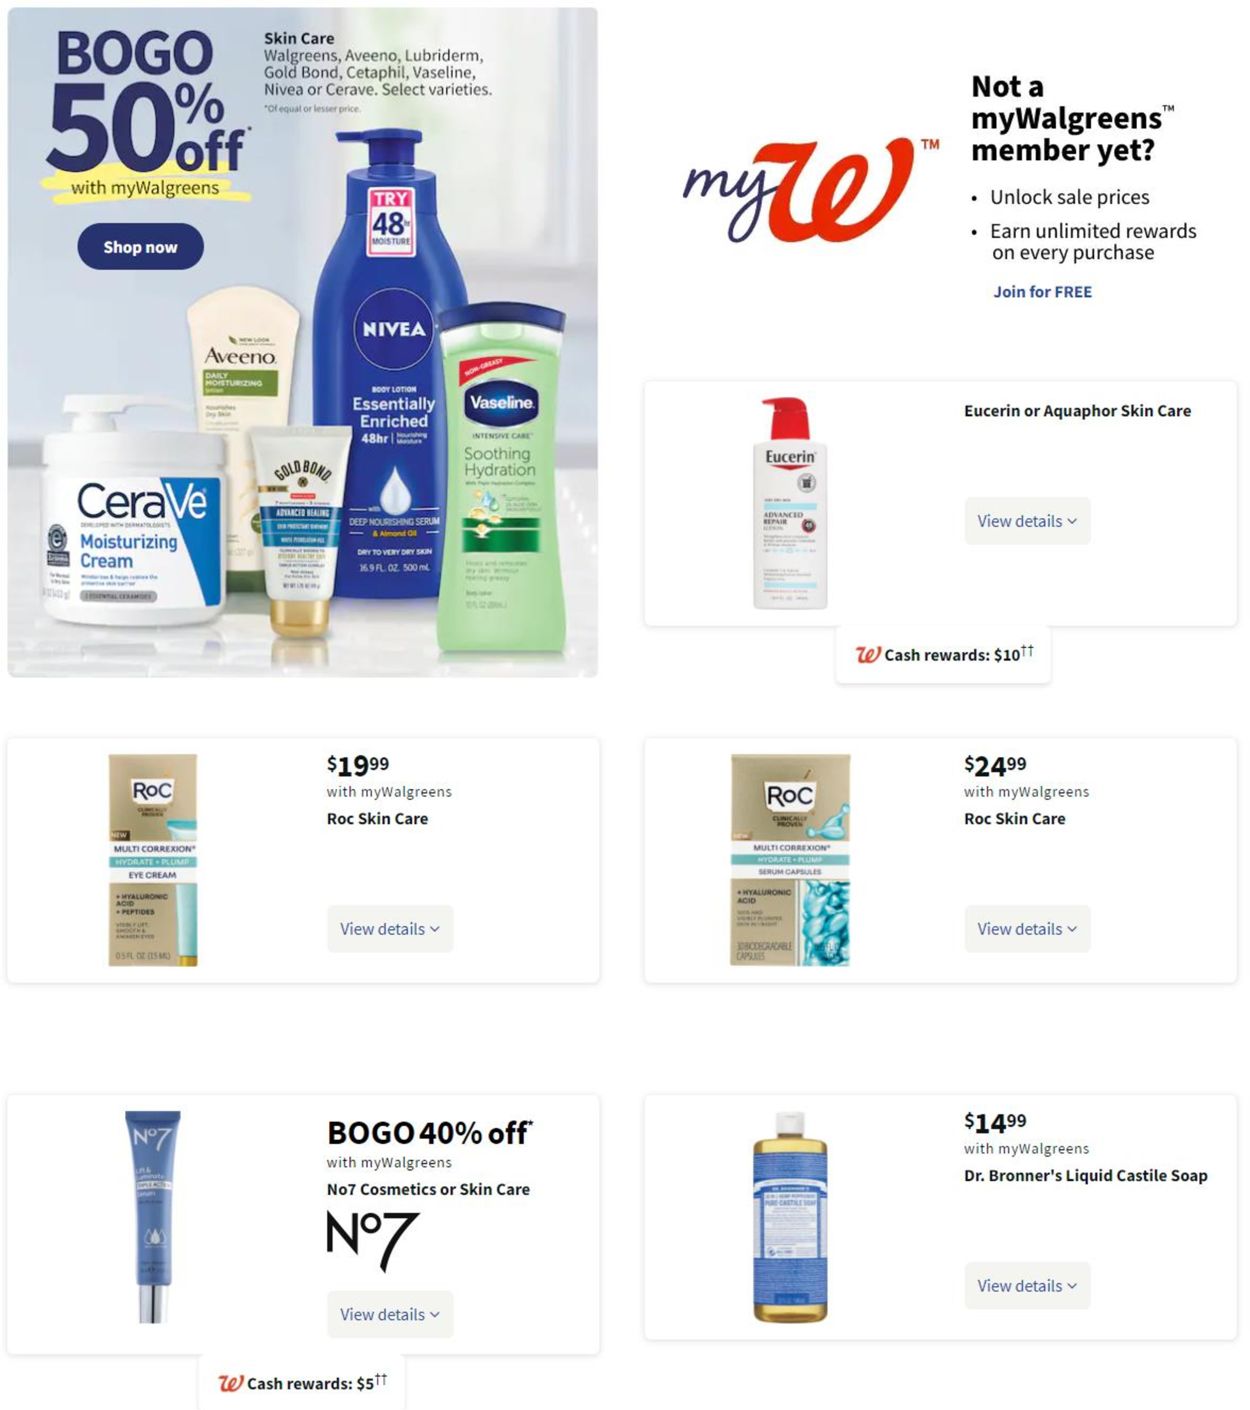 Walgreens Ad from 01/09/2022